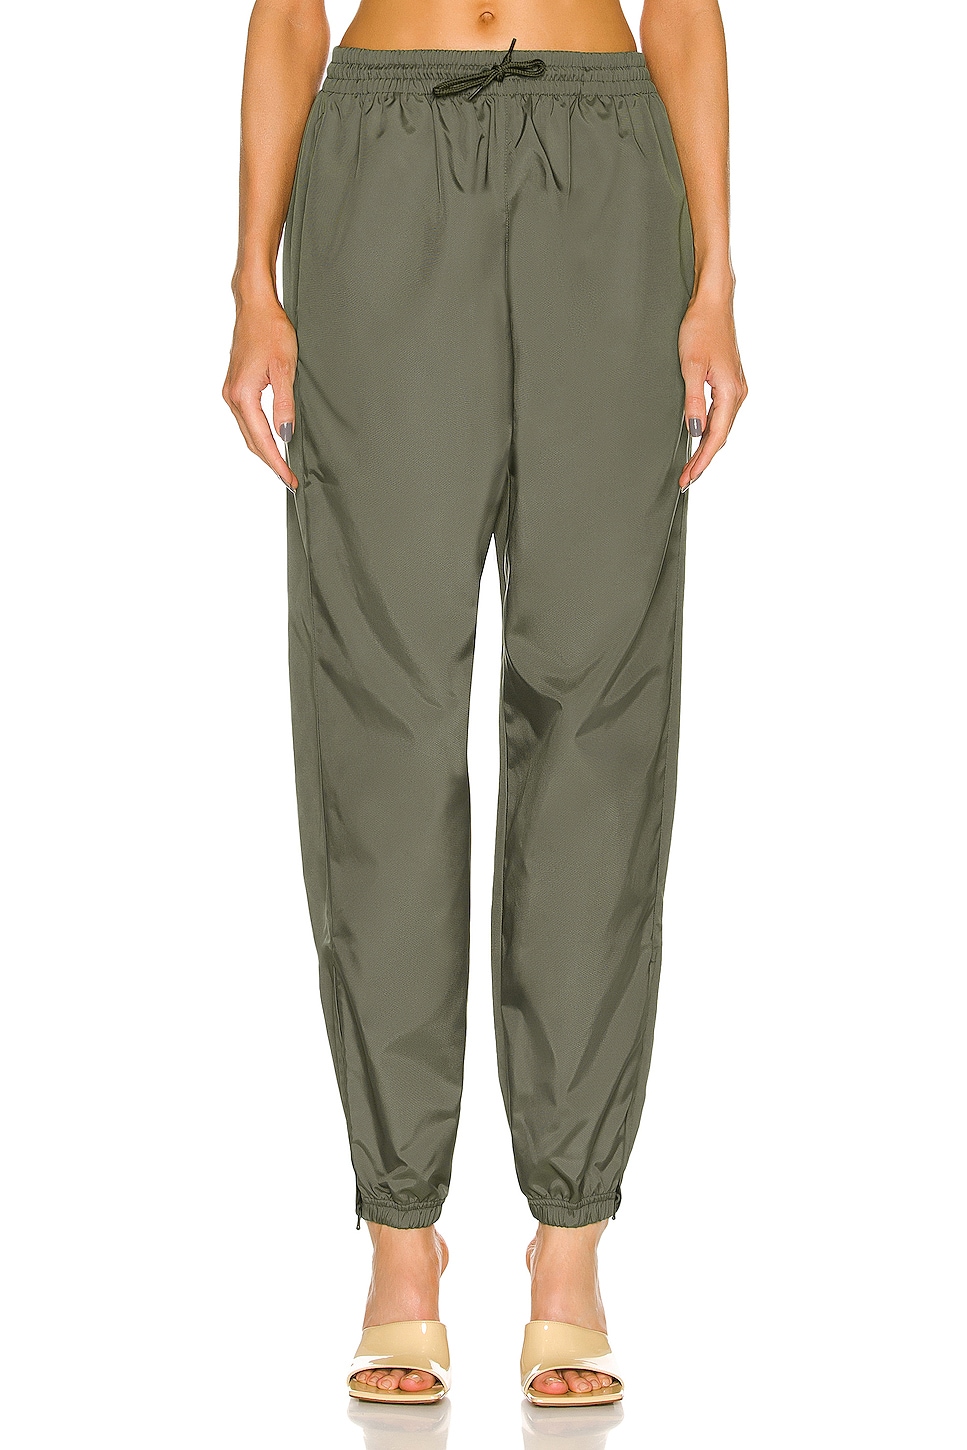 Image 1 of WARDROBE.NYC Utility Pant in Military